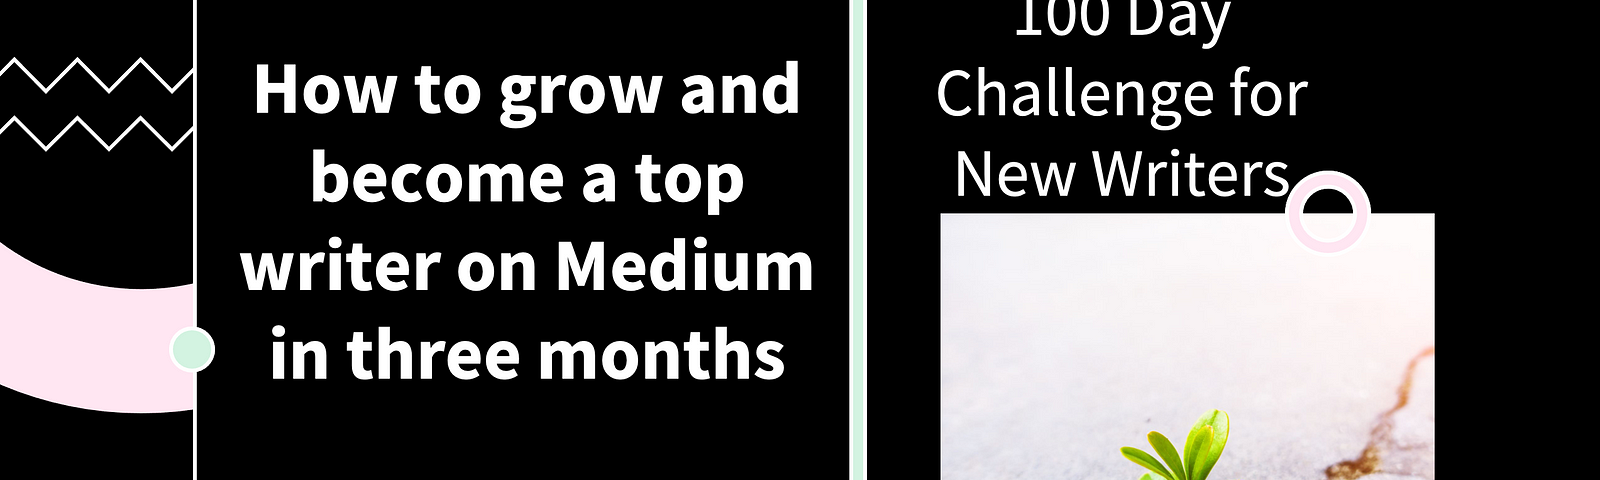 100 Day Writing Challenge For New Writers How to grow and become a top writer on Medium in three months. A guide by Dr Mehmet Yildiz — Chief Editor of ILLUMINATION Integrated Publications on Medium.